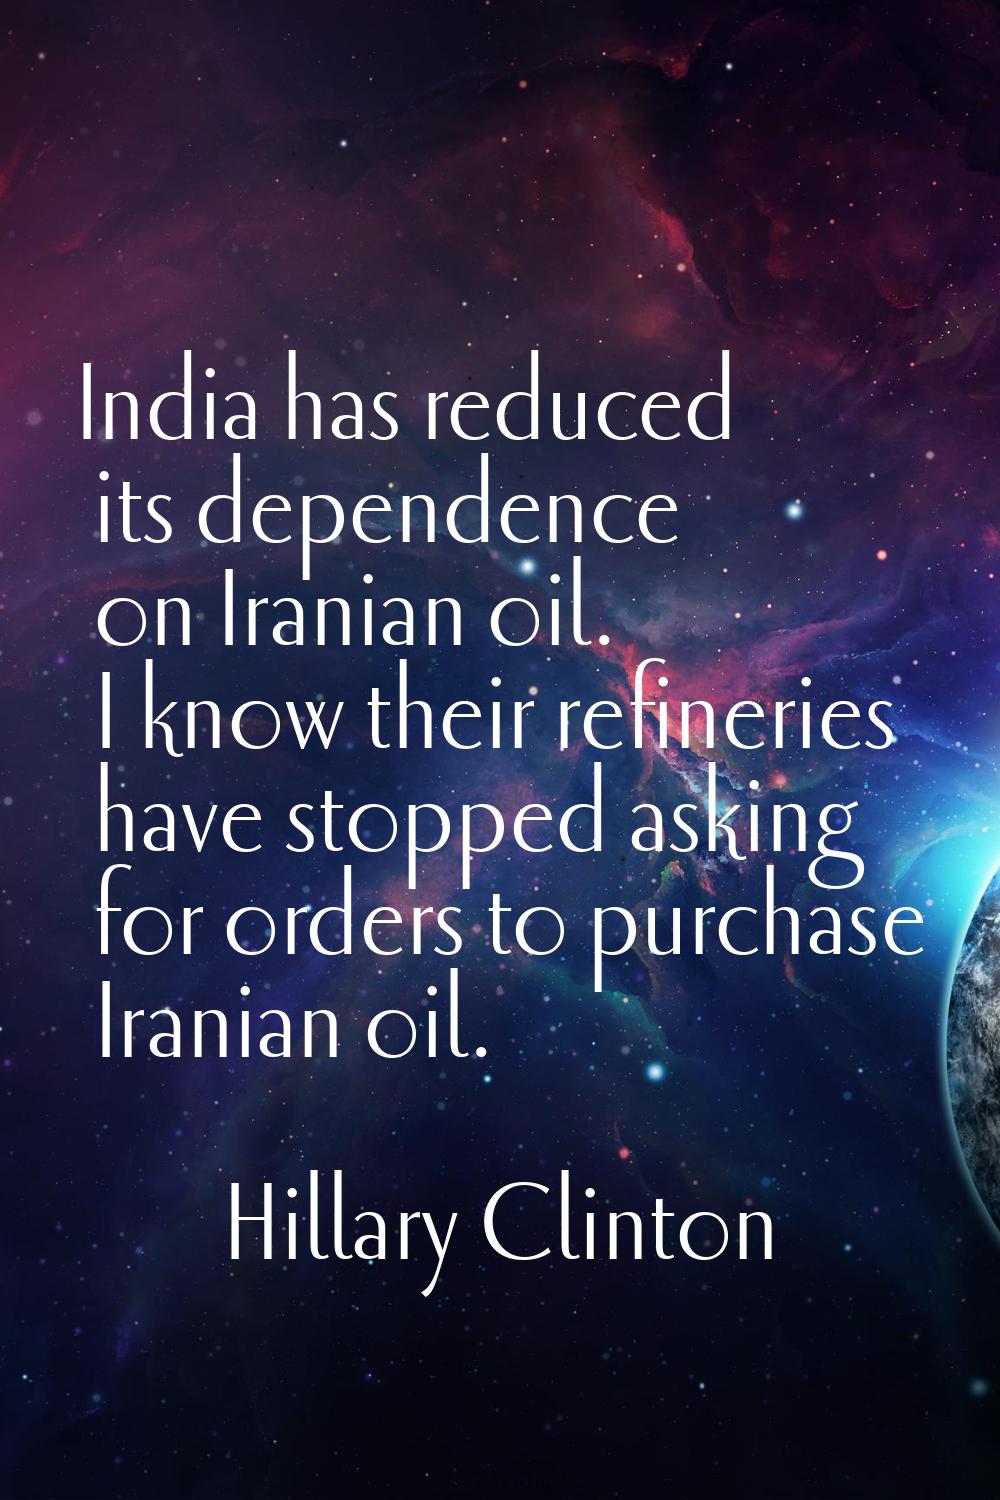 India has reduced its dependence on Iranian oil. I know their refineries have stopped asking for or